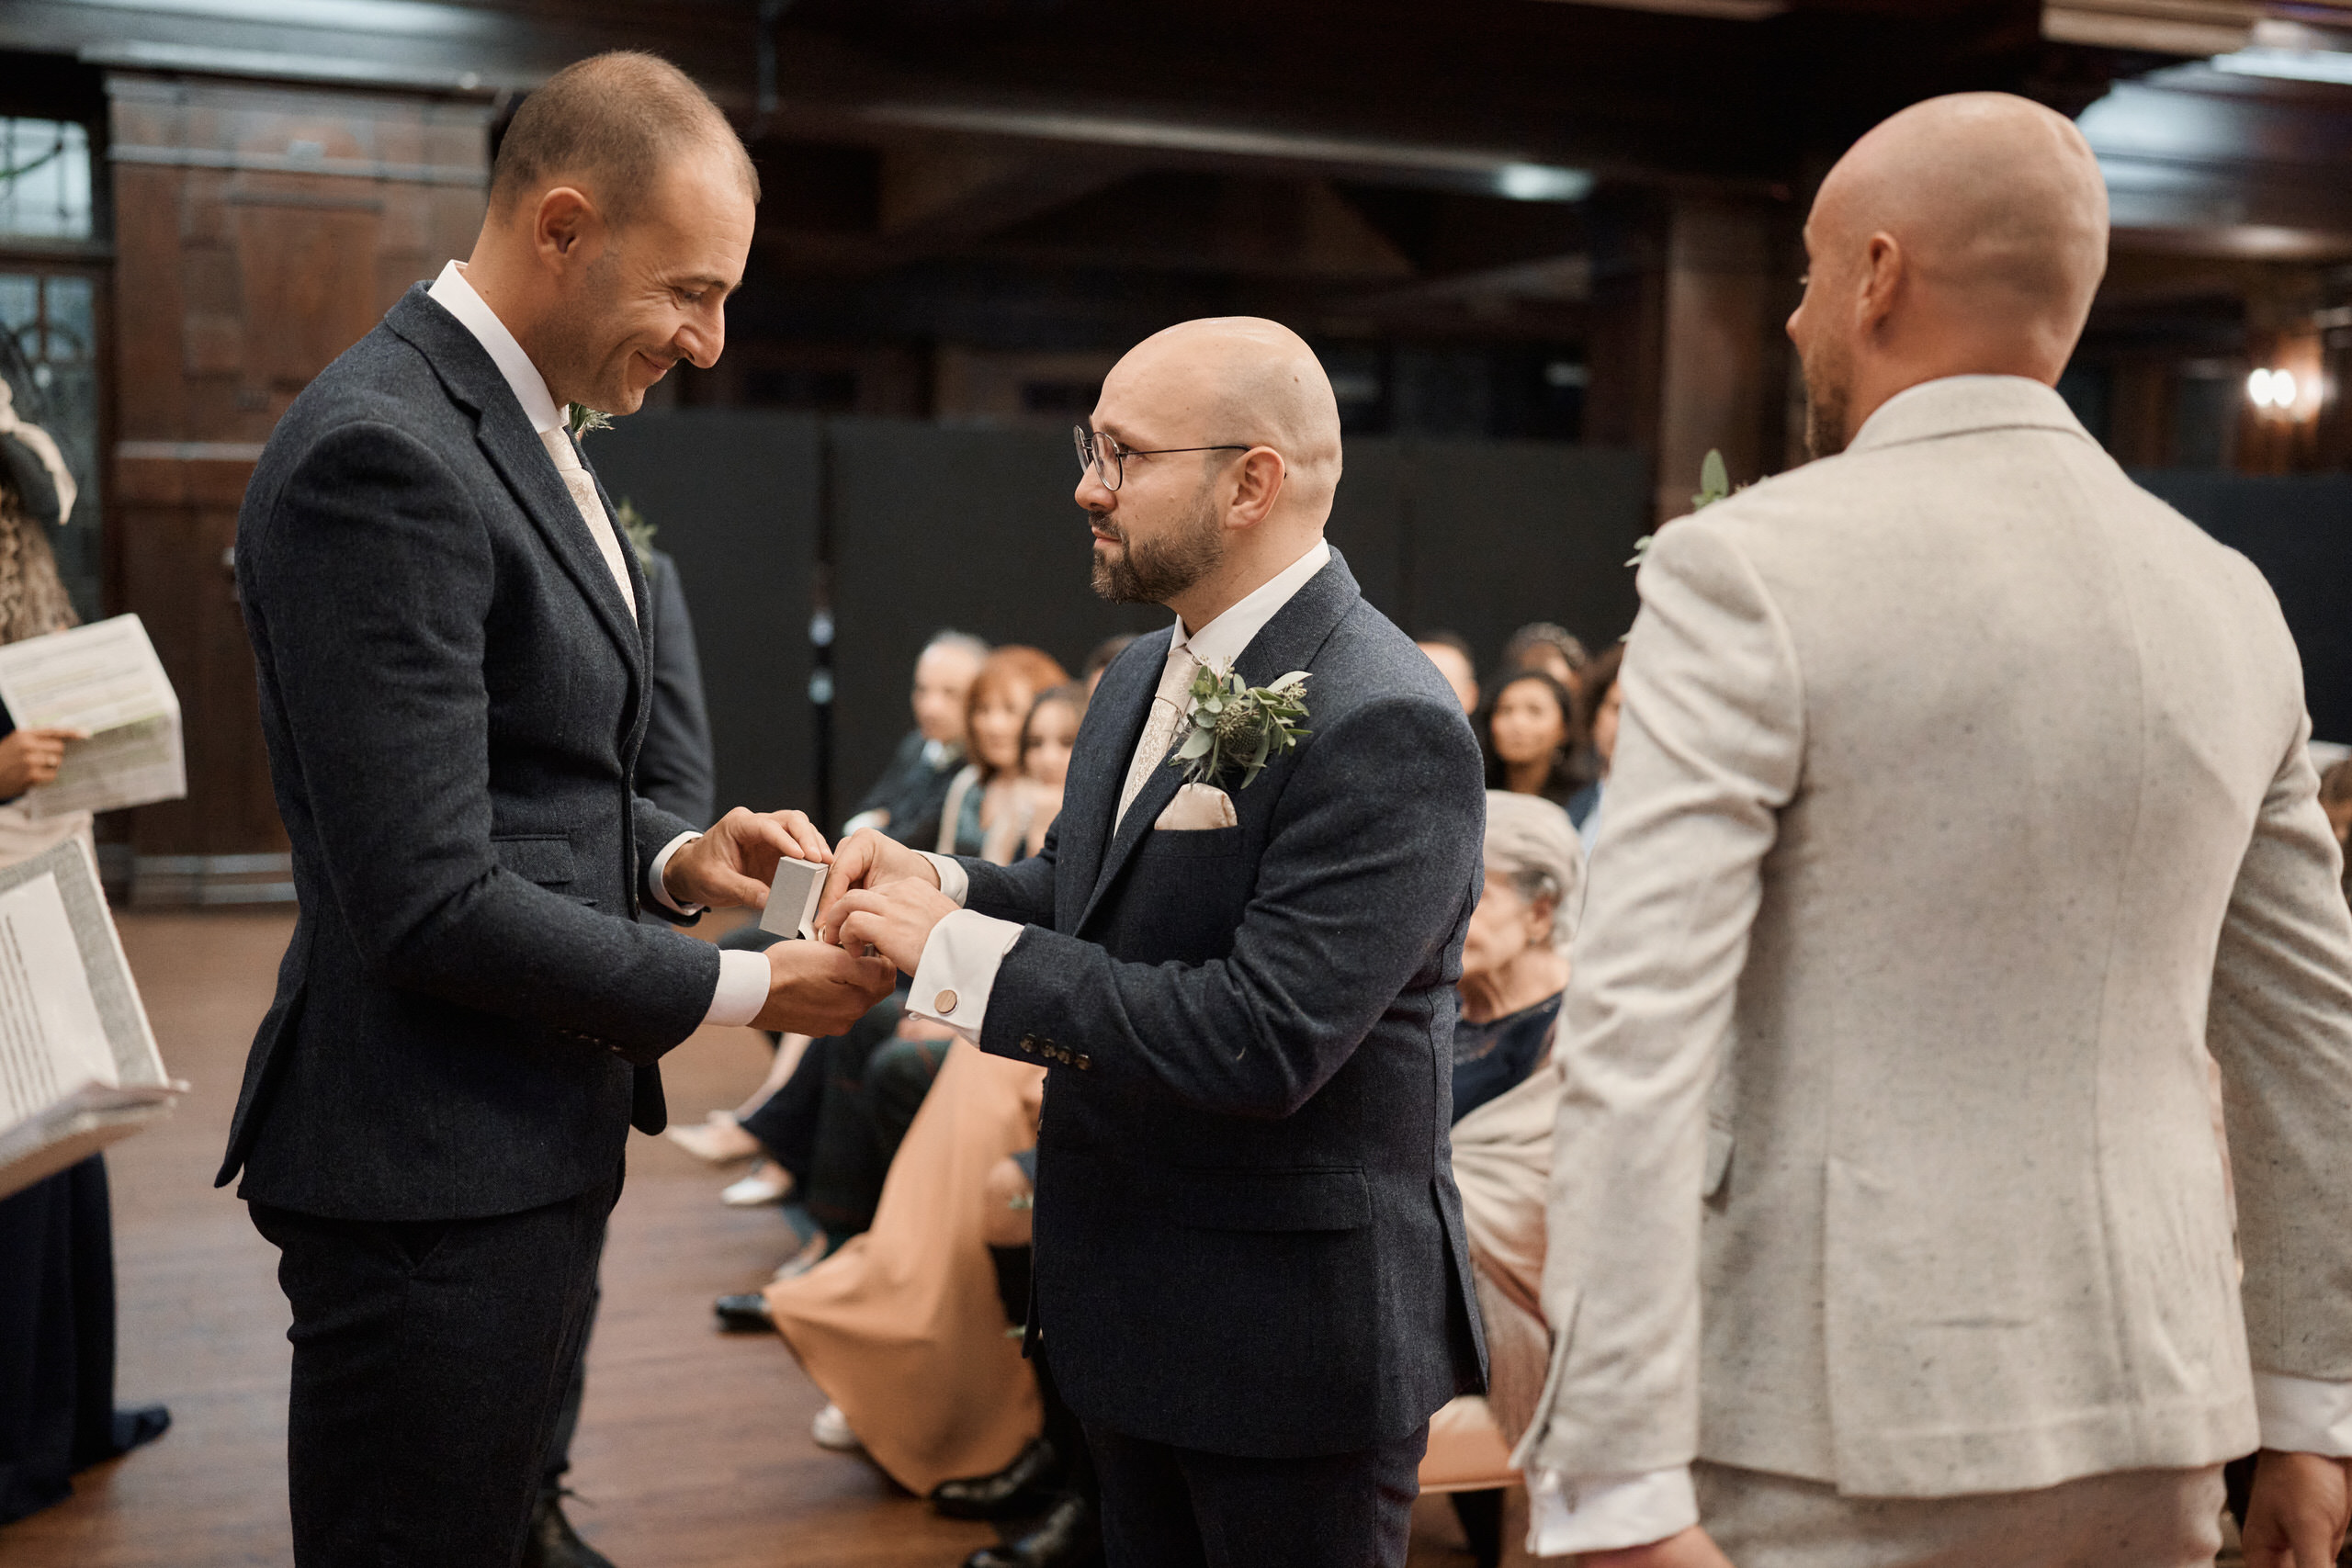 Two guys swapping rings at a wedding.